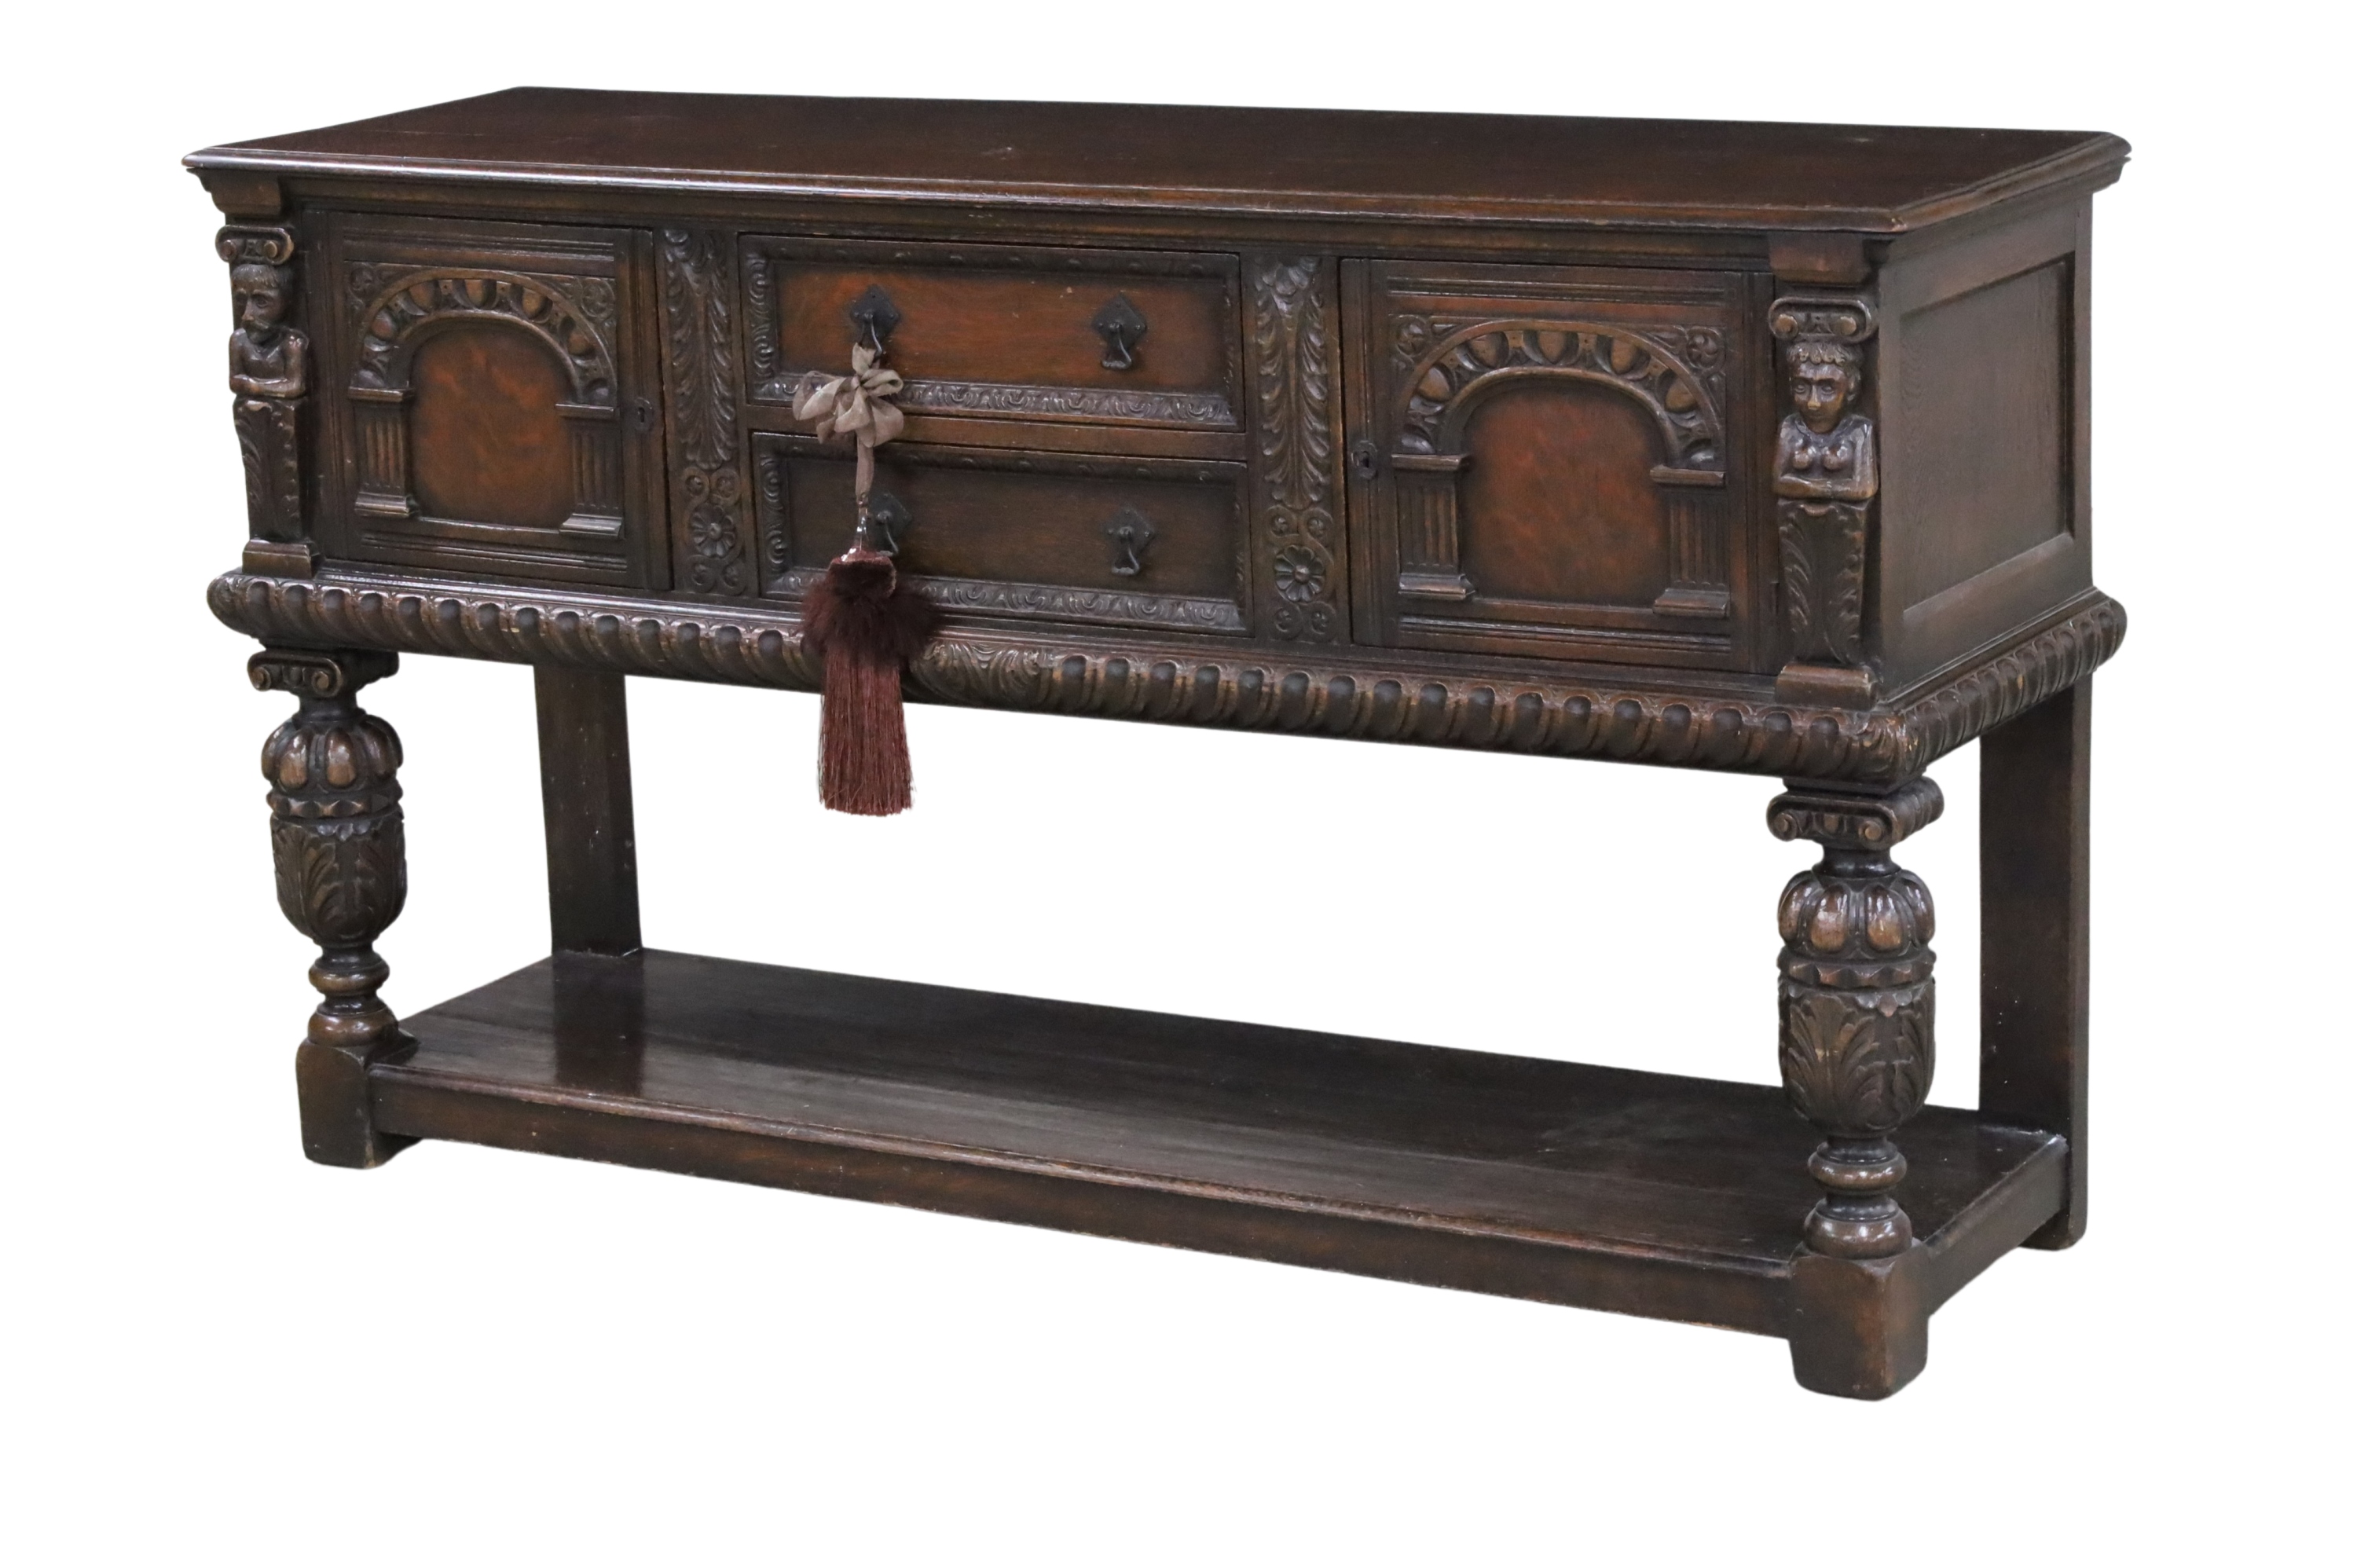 HANDSOME JACOBEAN STYLE OAK CARVED BUFFET